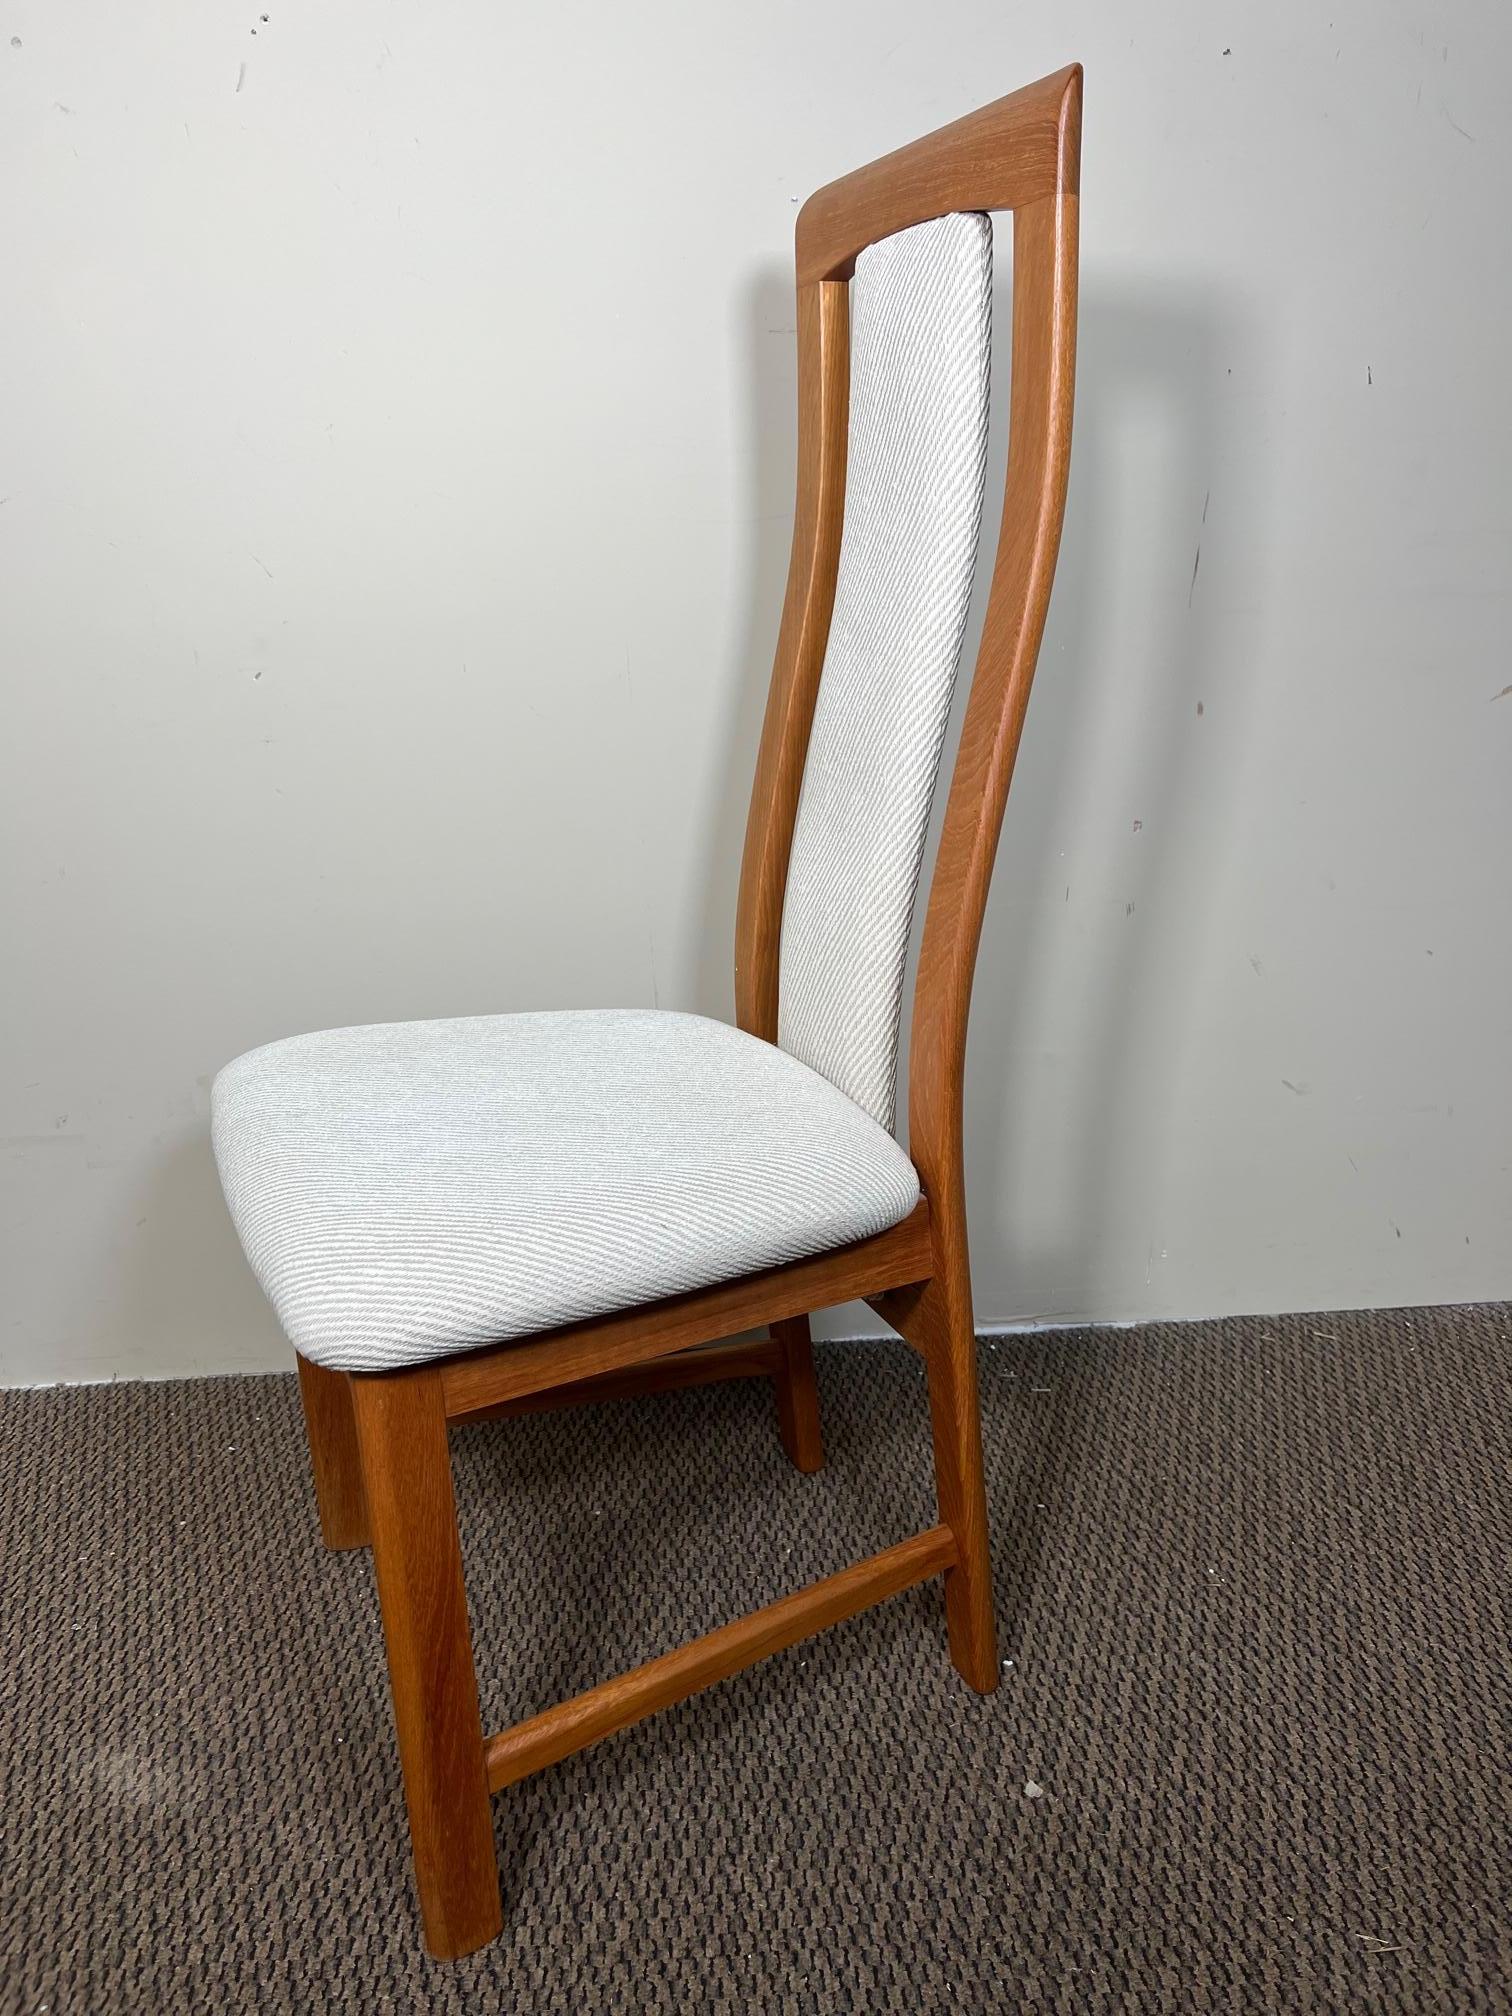 Beautiful set of 6 midcentury Danish Modern teak dining chairs with padded fabric back. Made by Nordic Furniture, Markdale Ontario Canada. Stamped underneath.

Very good condition. All the chairs are very sturdy. Upholstery appears to be original.